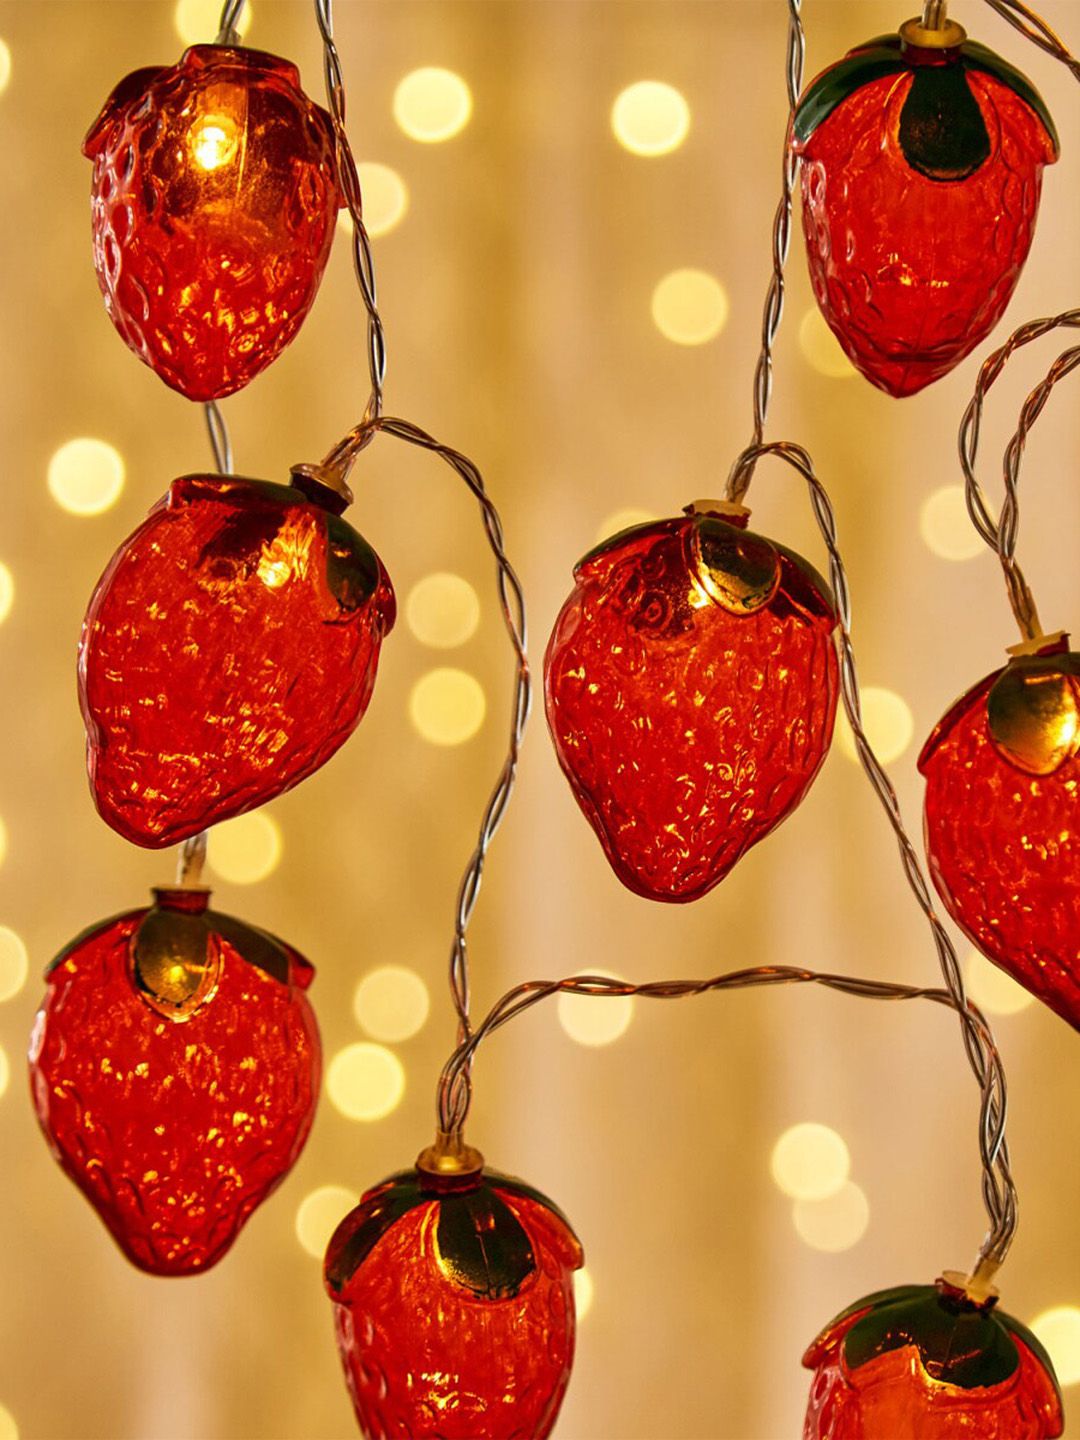 Home Centre Red & Green Strawberry Shaped Corsica Textured String Light - 10 Bulbs Price in India